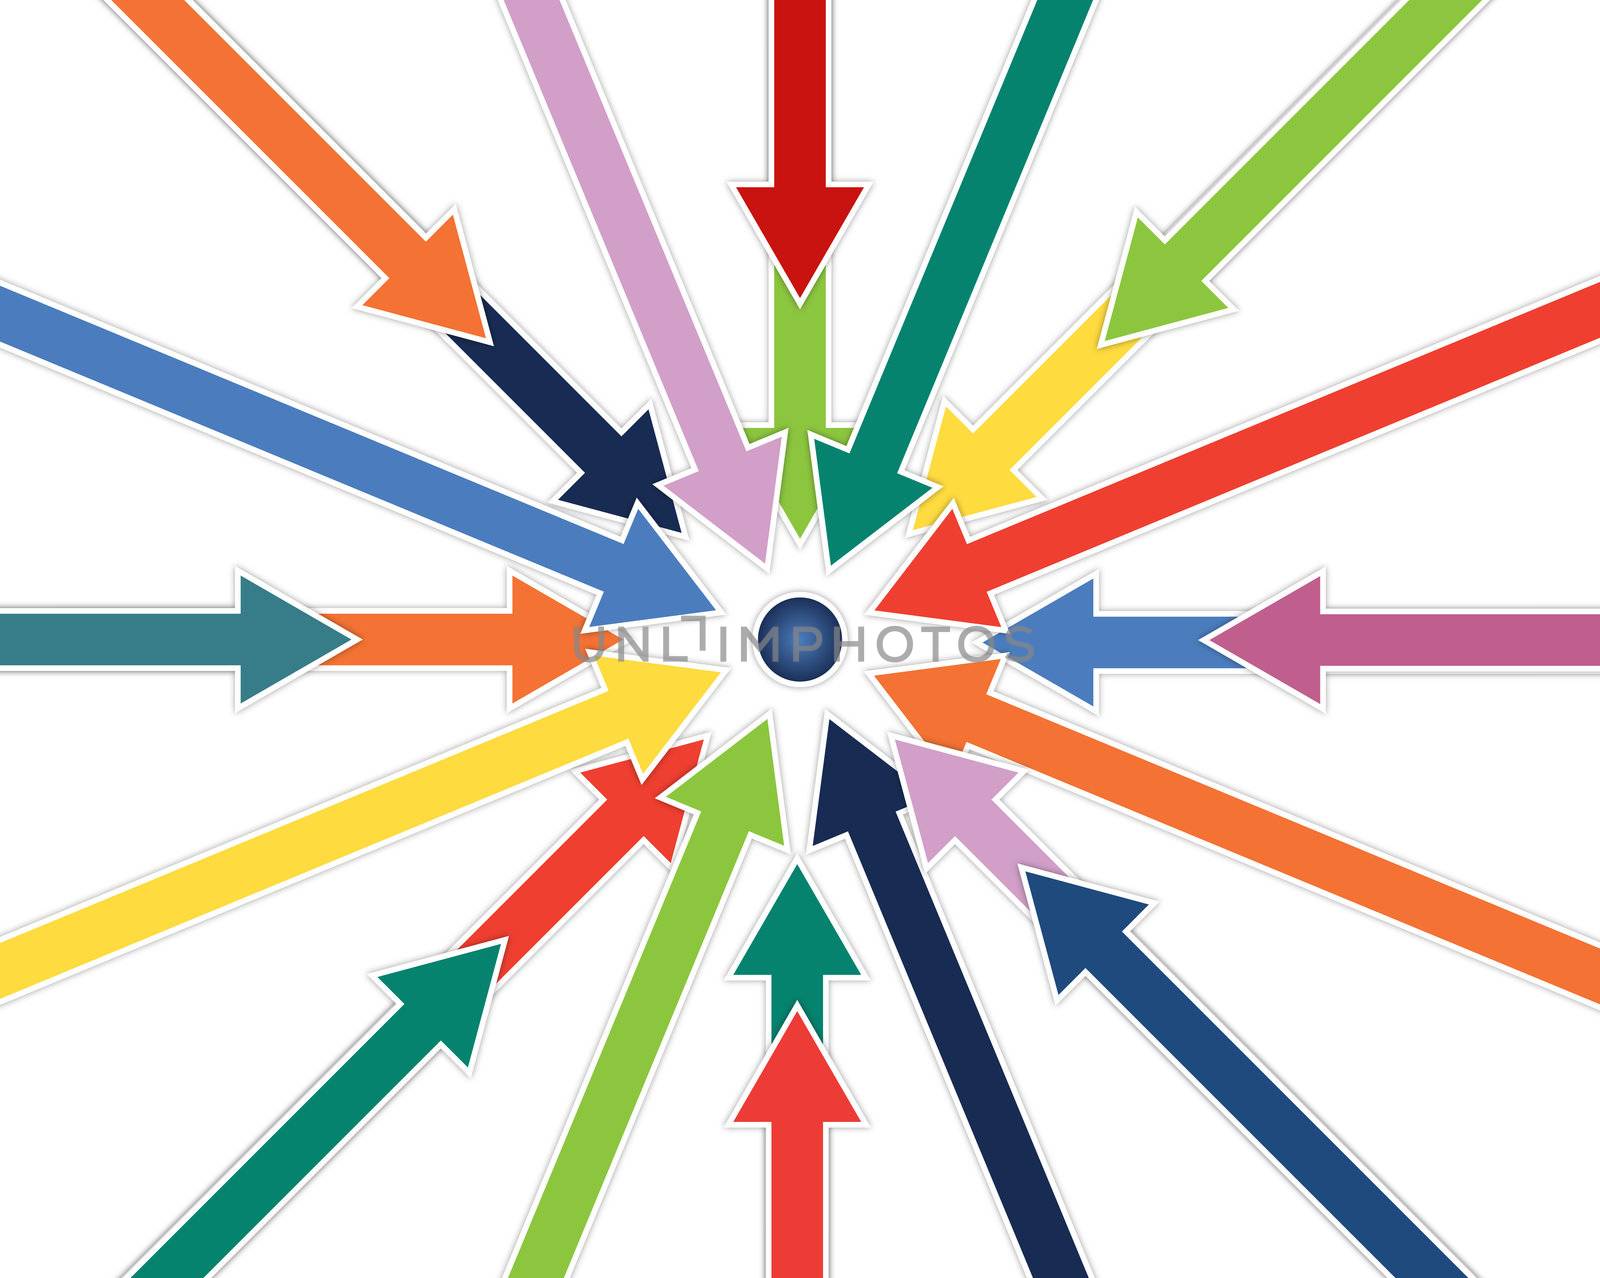 pastel colors arrows pointing to the center point